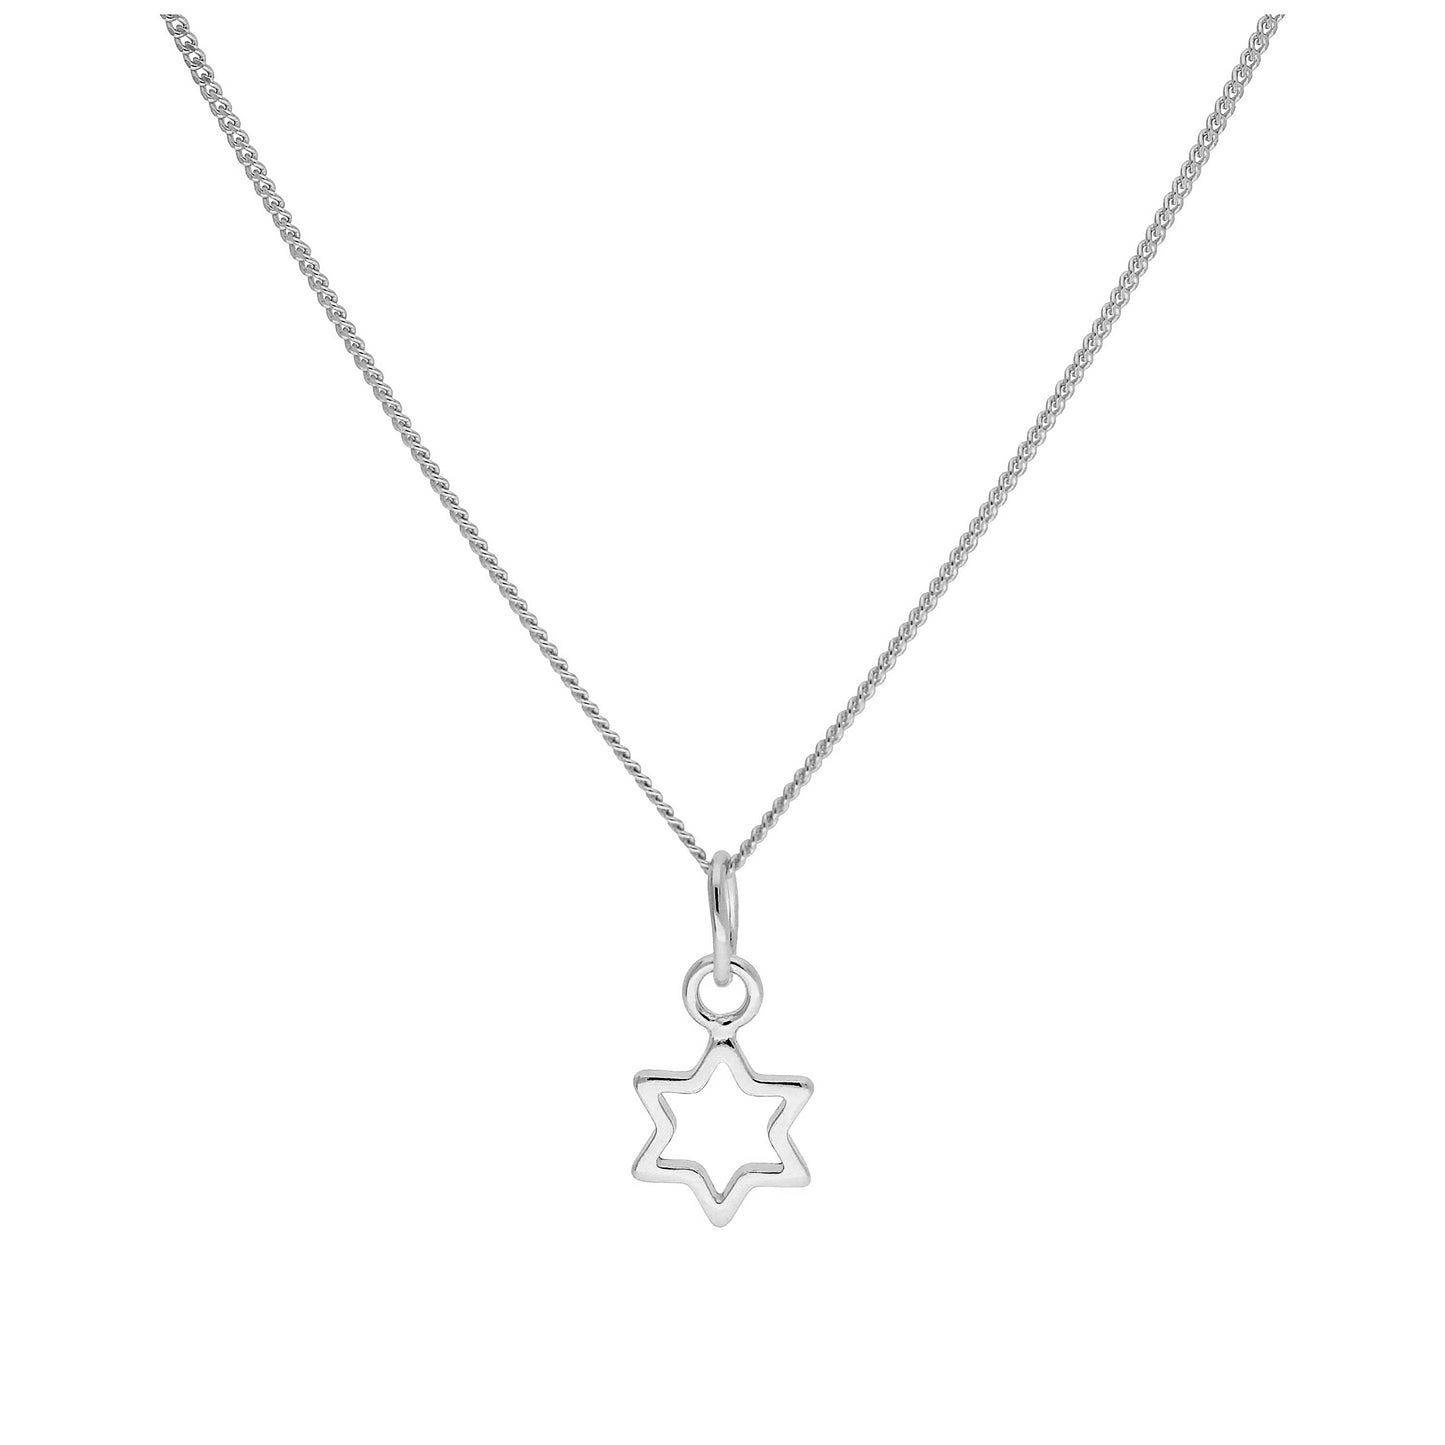 Tiny Sterling Silver Outline Star Necklace 14 - 32 Inches